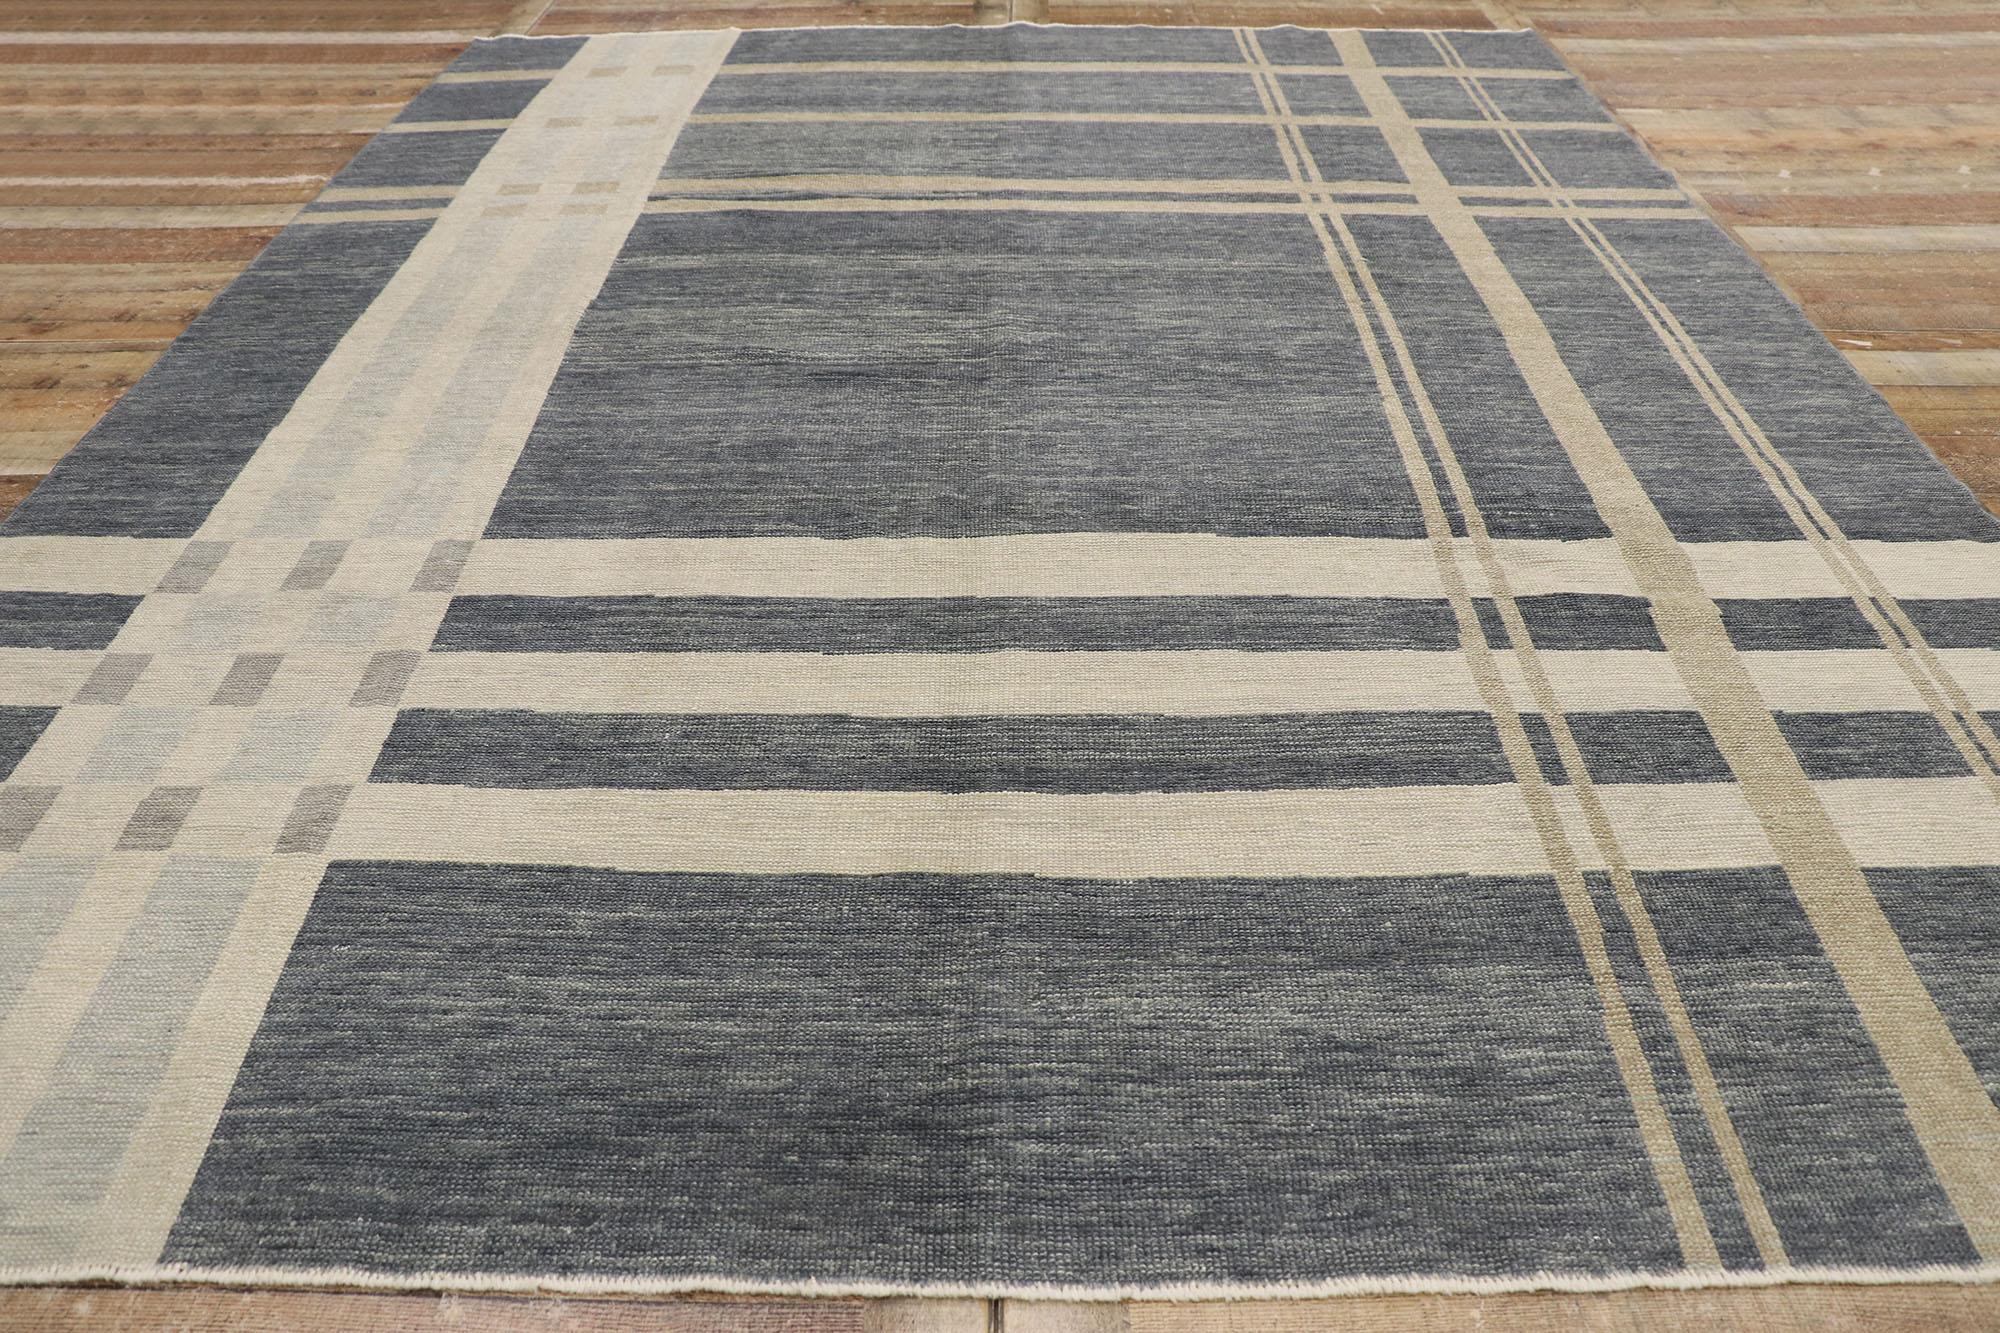 Contemporary New Modern Gray Plaid Tartan Rug with Ivy League Style For Sale